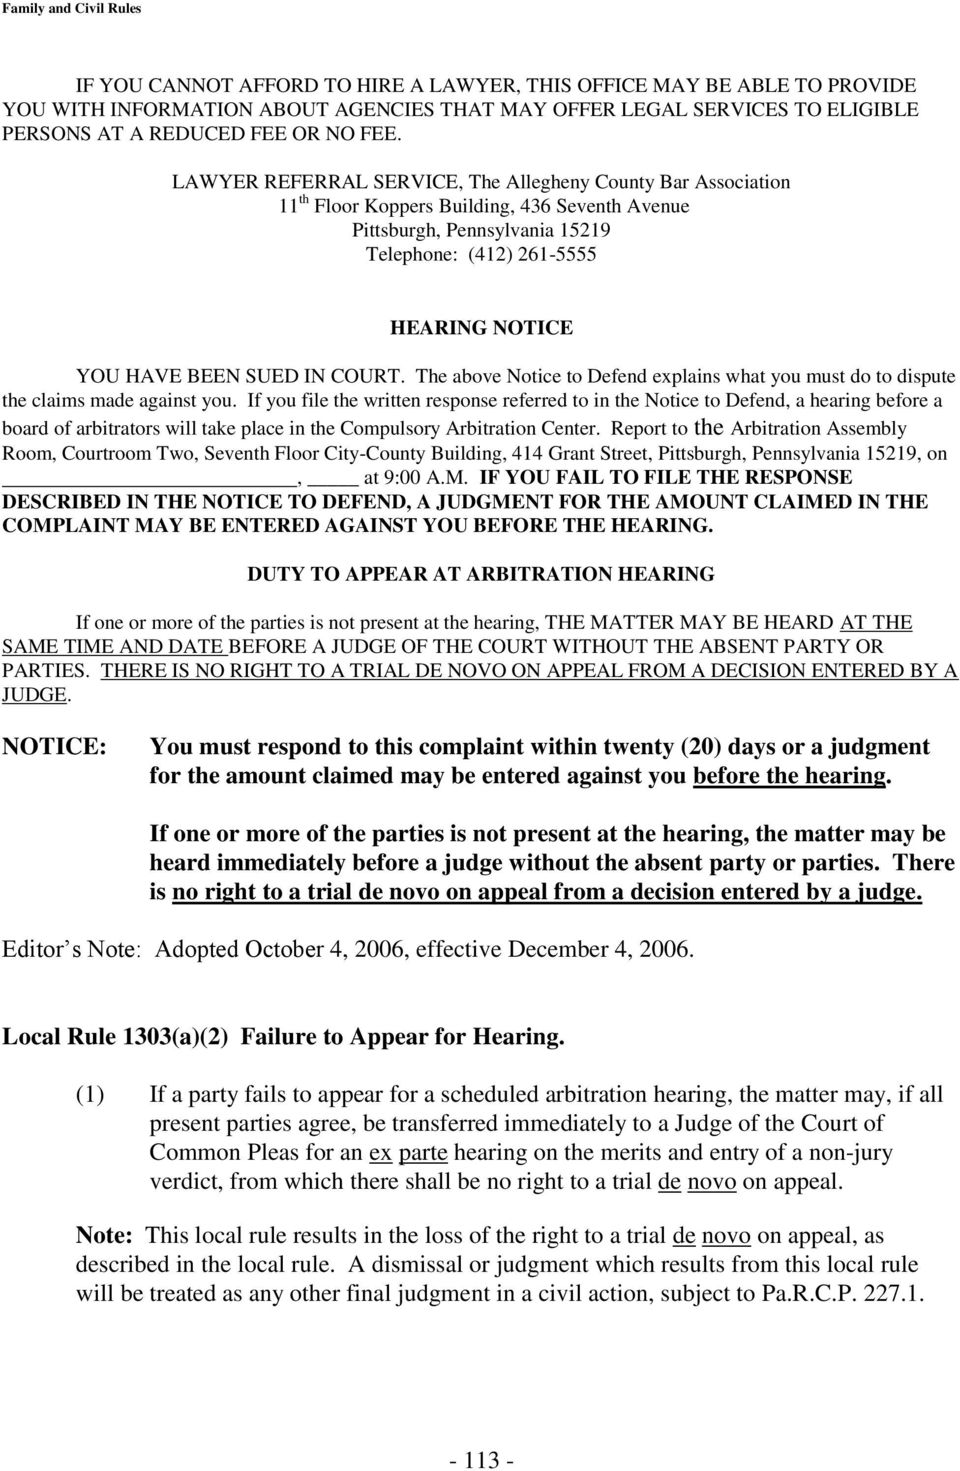 SUED IN COURT. The above Notice to Defend explains what you must do to dispute the claims made against you.